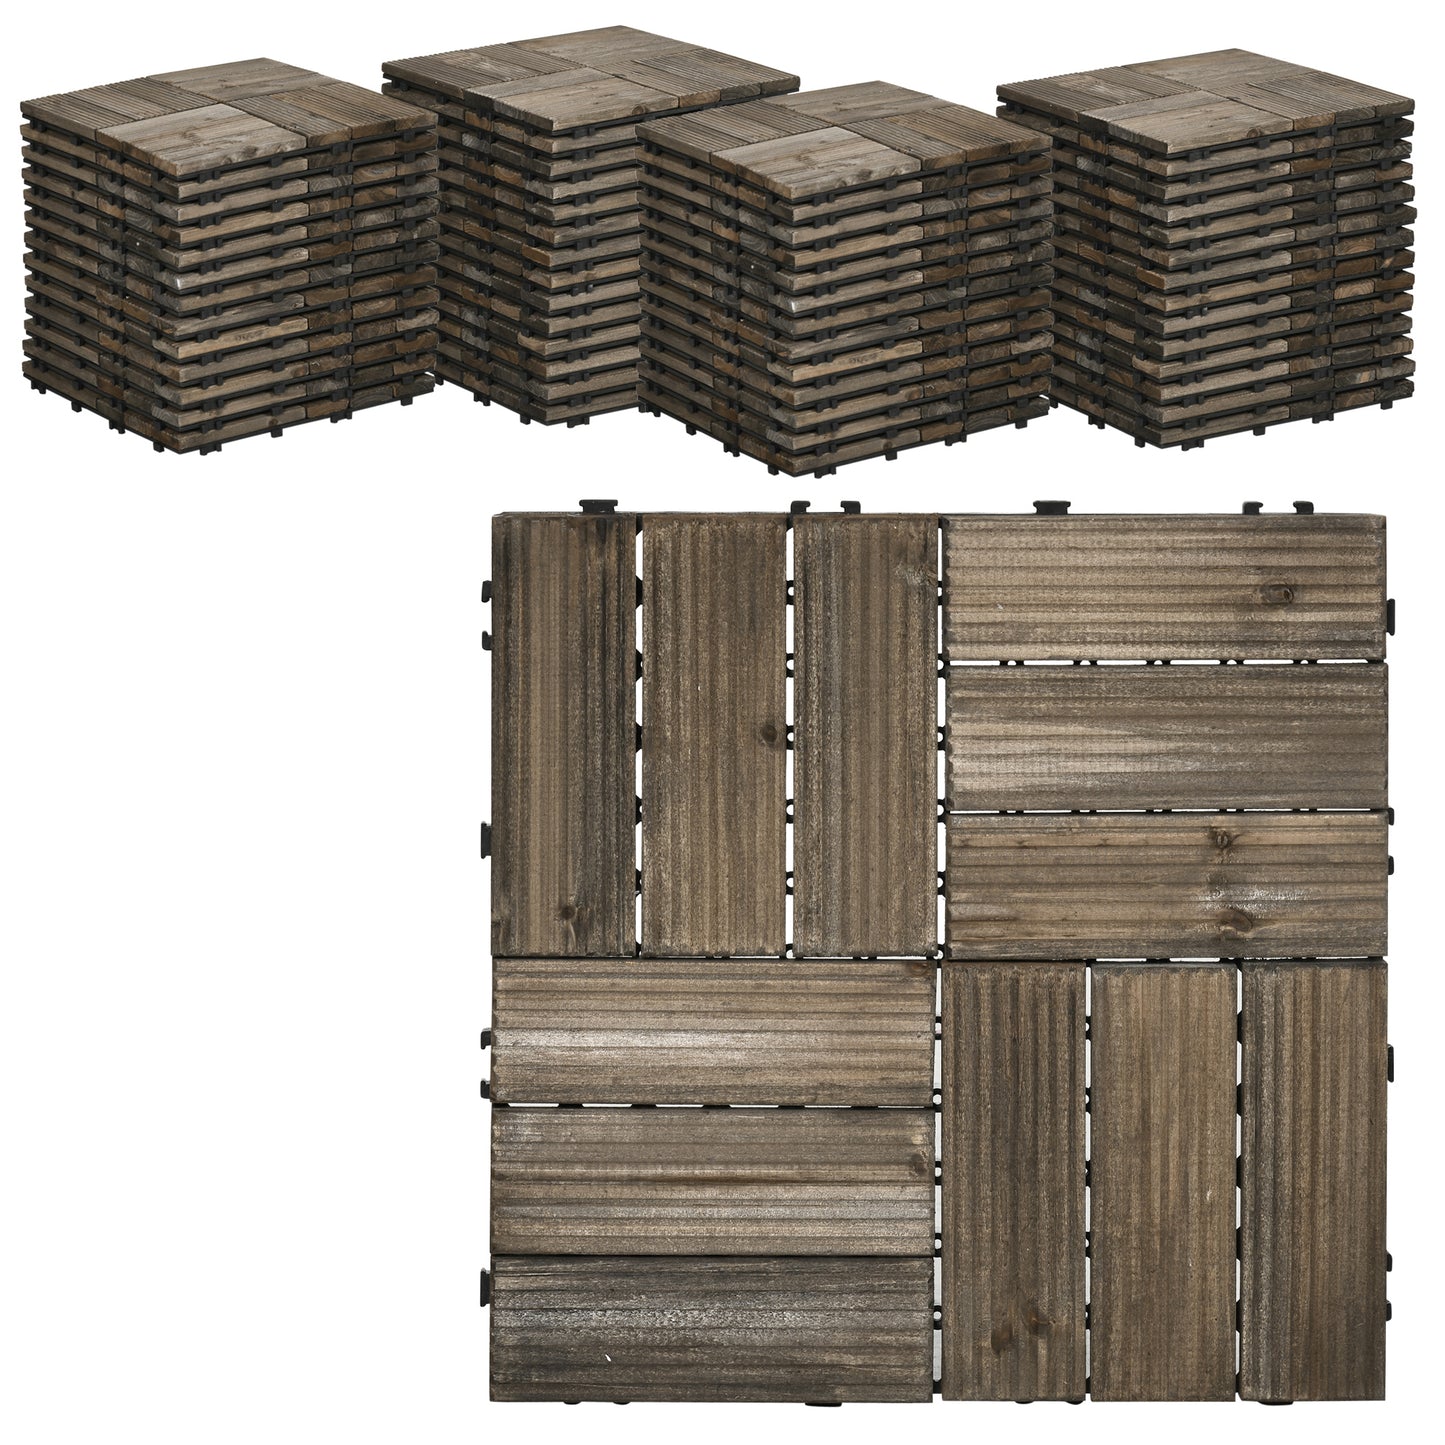 54 Pcs Wood Interlocking Deck Tiles, 12 x 12in Outdoor Flooring Tiles for Indoor and Outdoor Use, Tools Free Assembly, Charcoal Grey at Gallery Canada